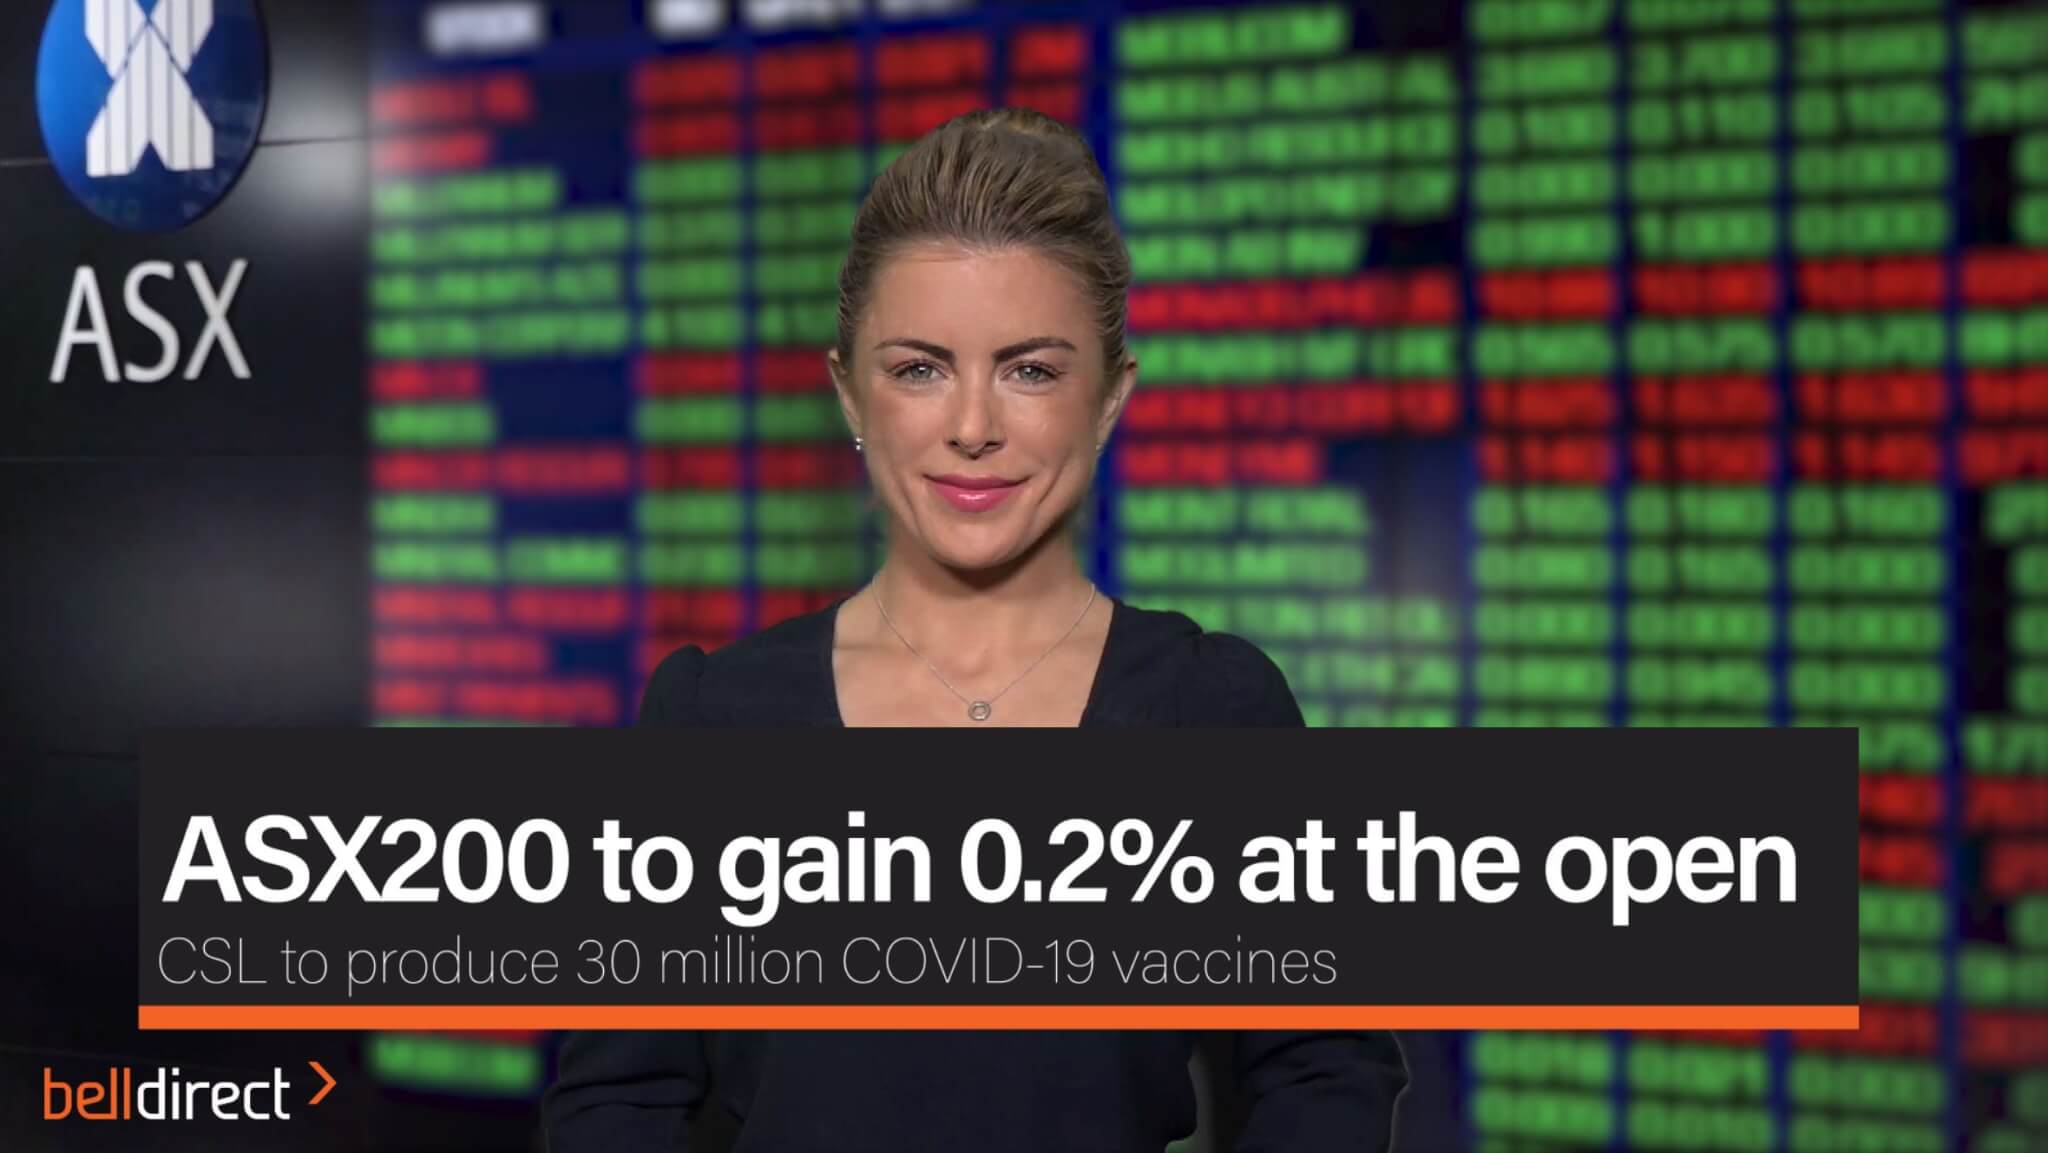 ASX200 to gain 0.2% at the open